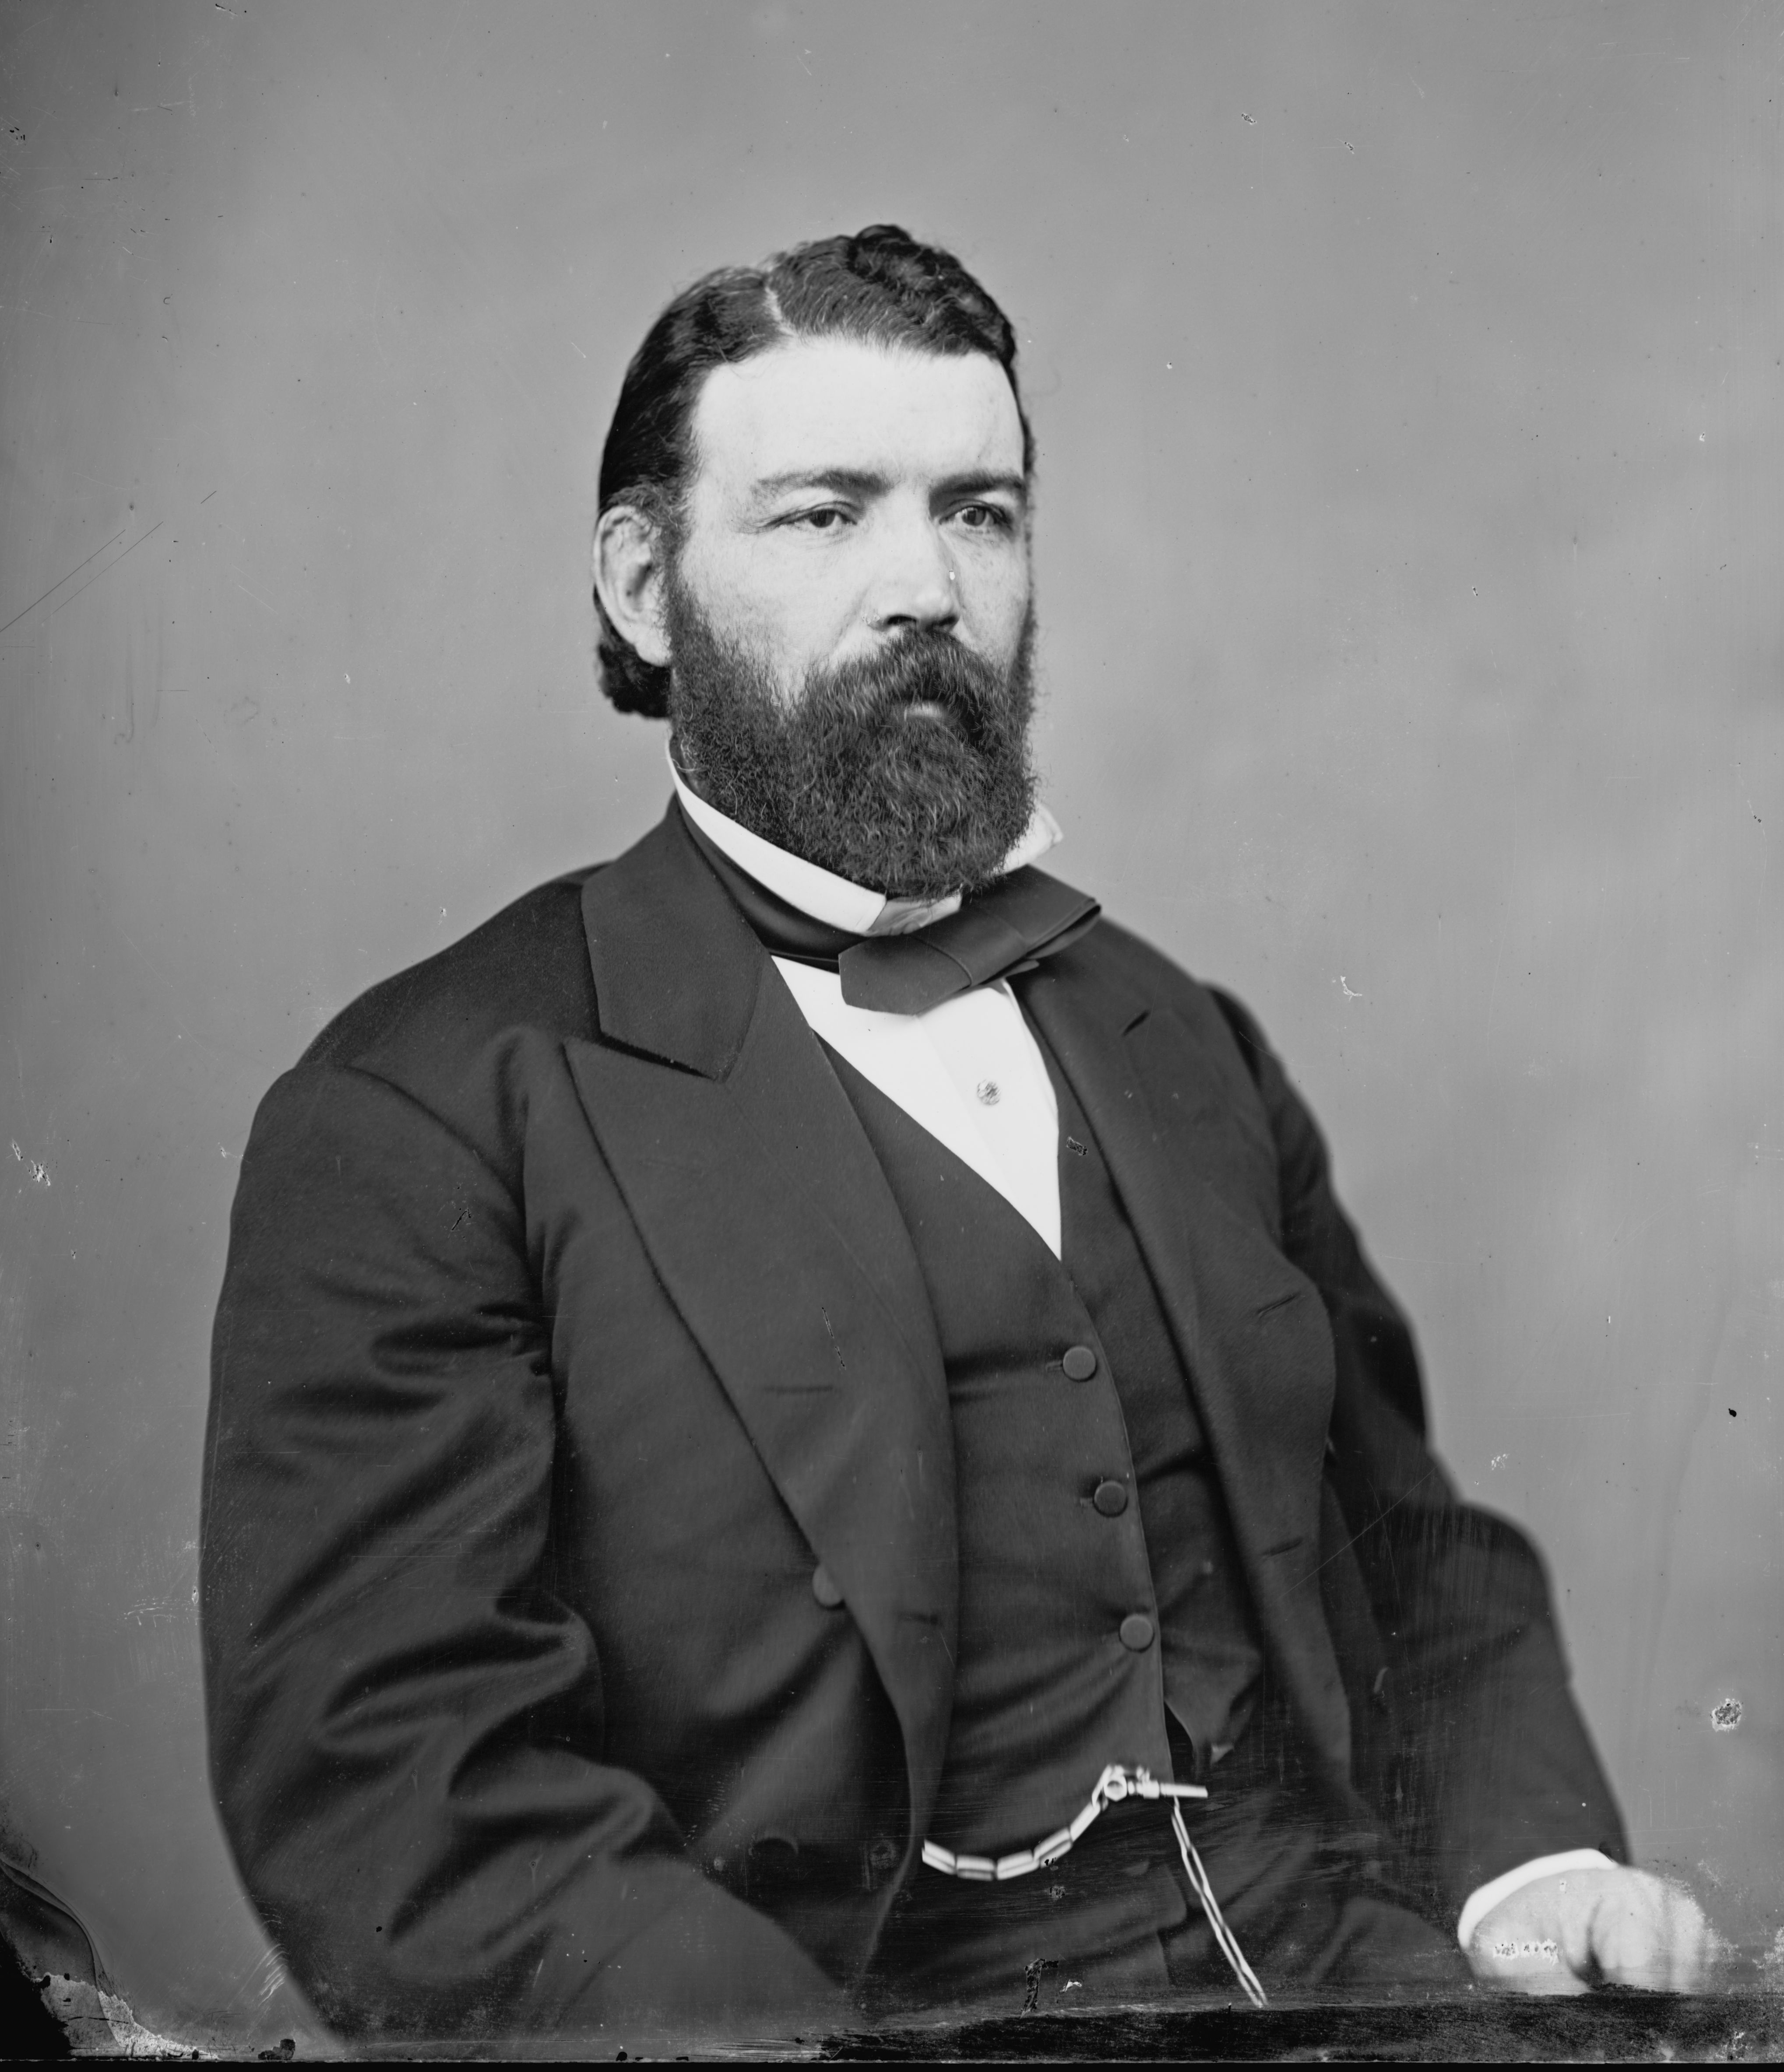 Hon. John Morrissey of New York (Library of Congress, Prints & Photographs Division [LC-DIG-cwpbh-04834])